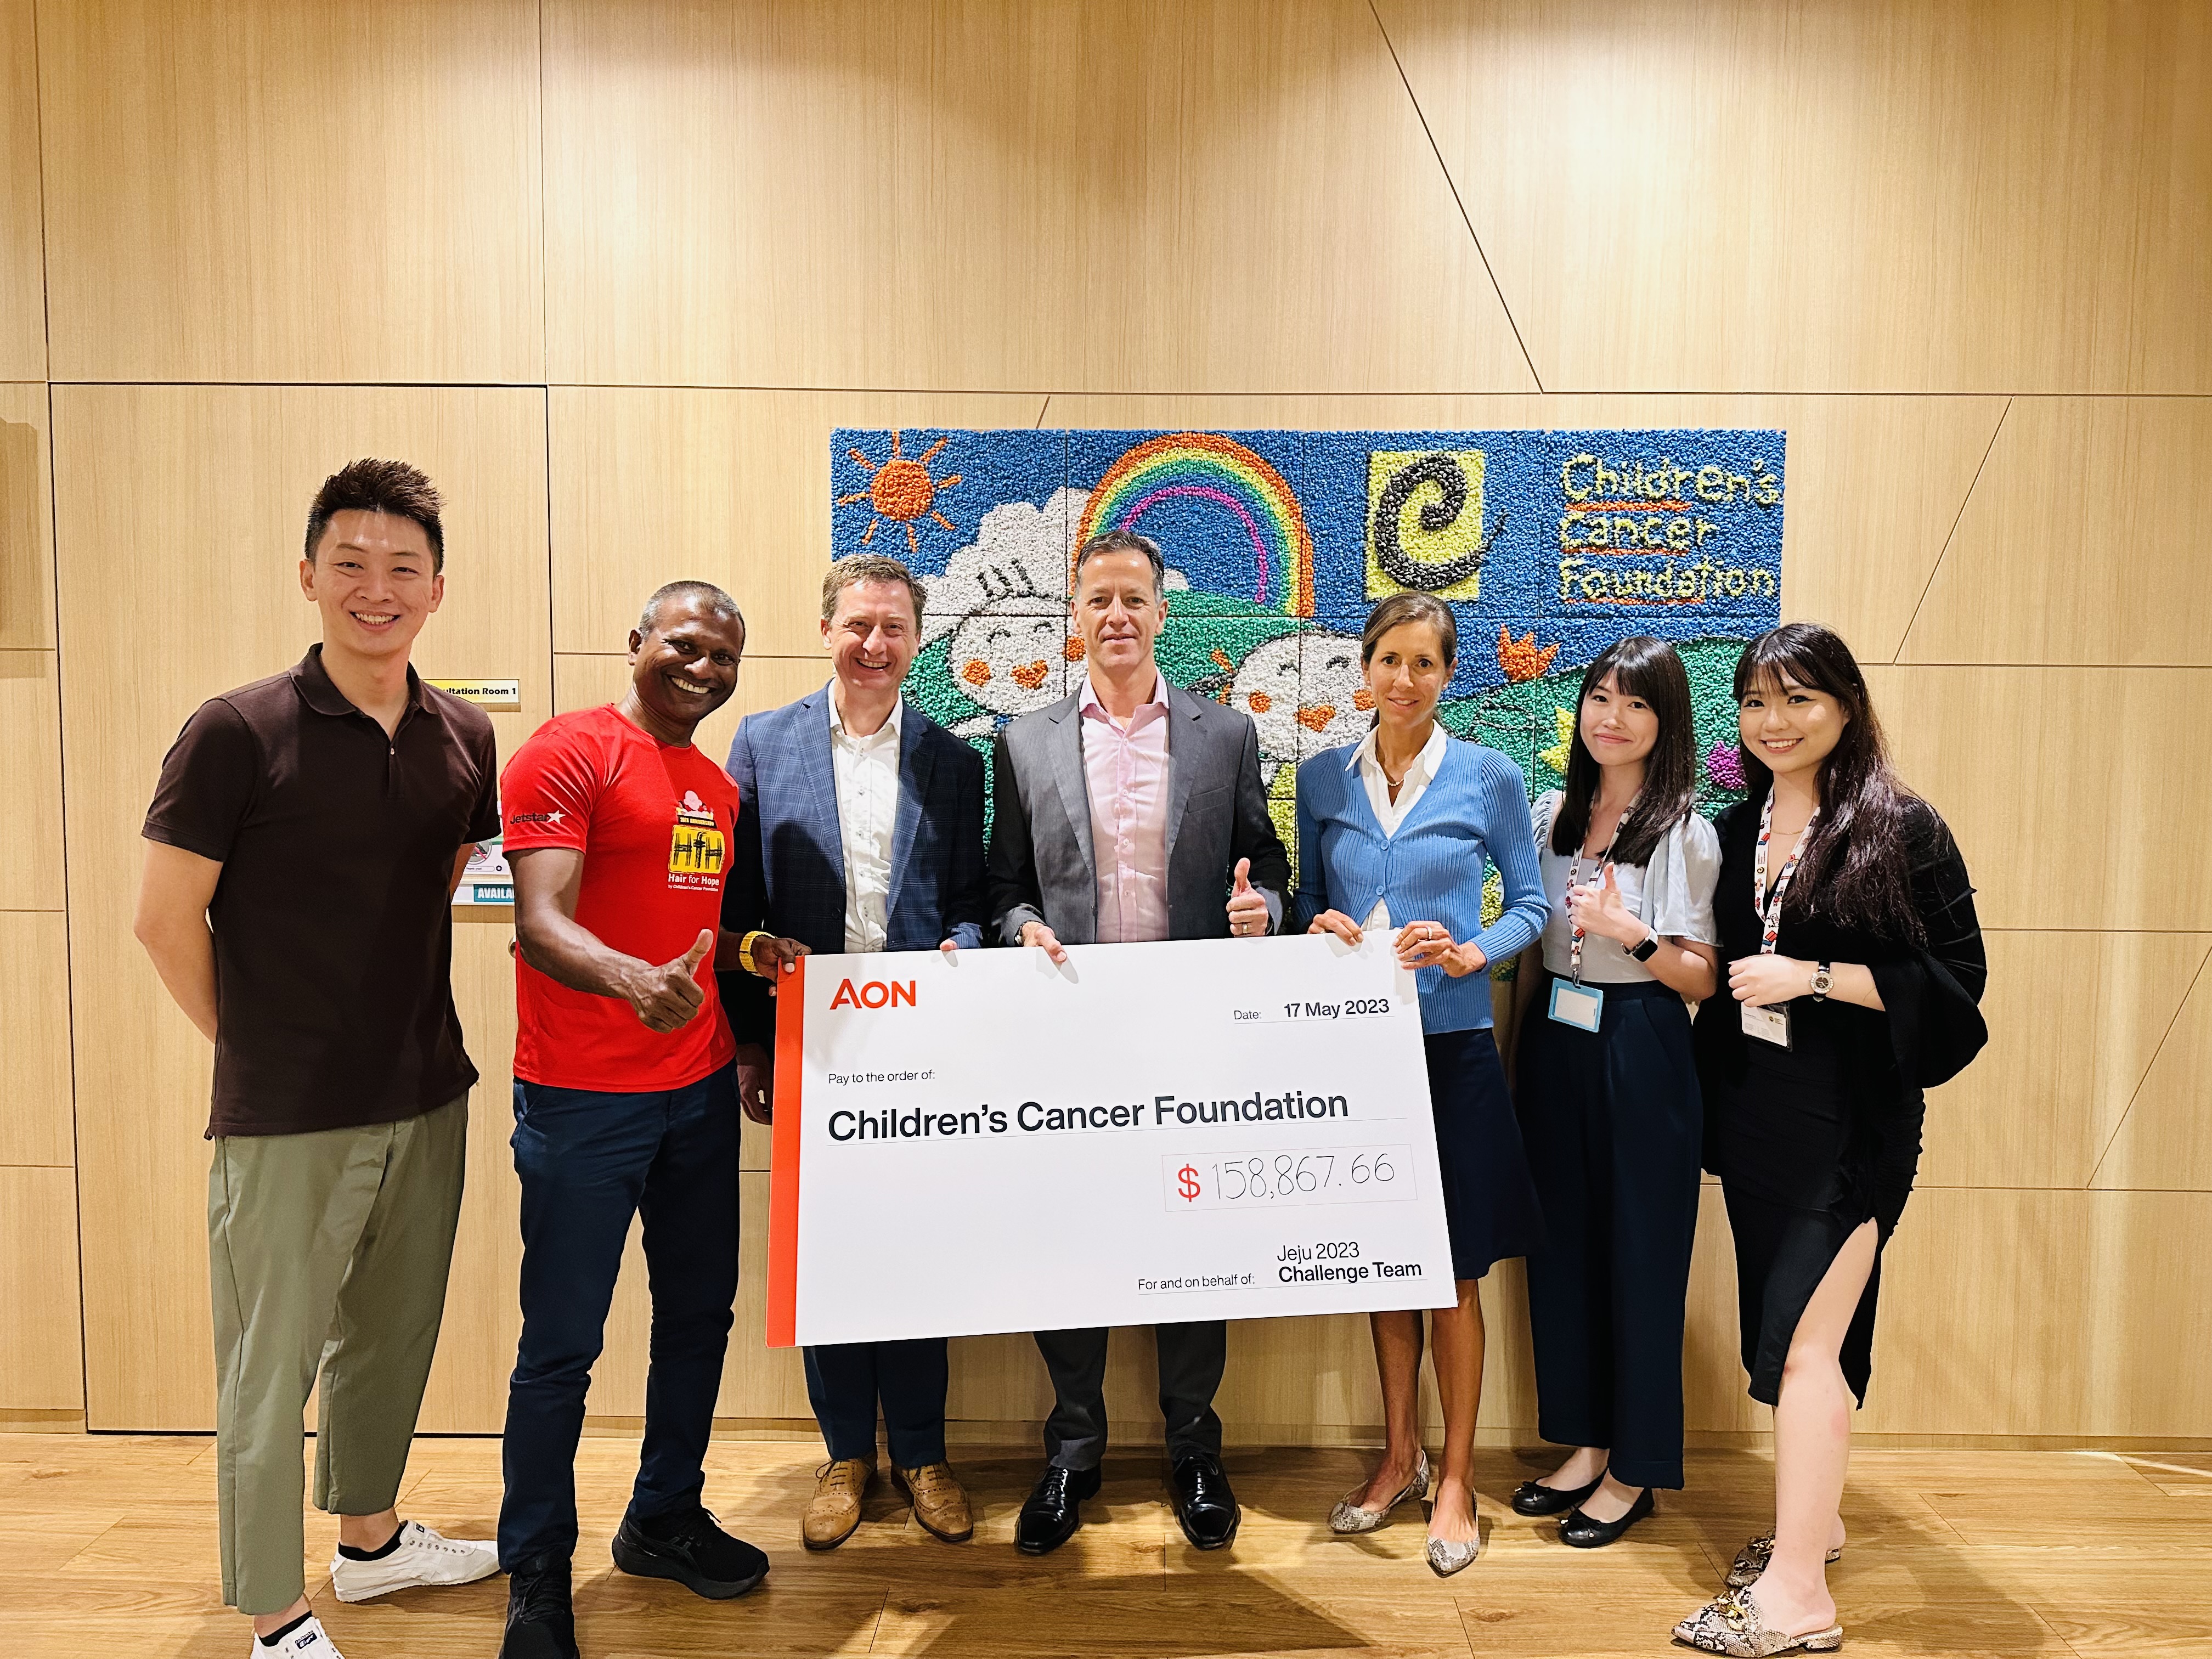 Aon Raises over SGD 150,000 for Children’s Cancer Foundation in Singapore Through Fundraising Event Image